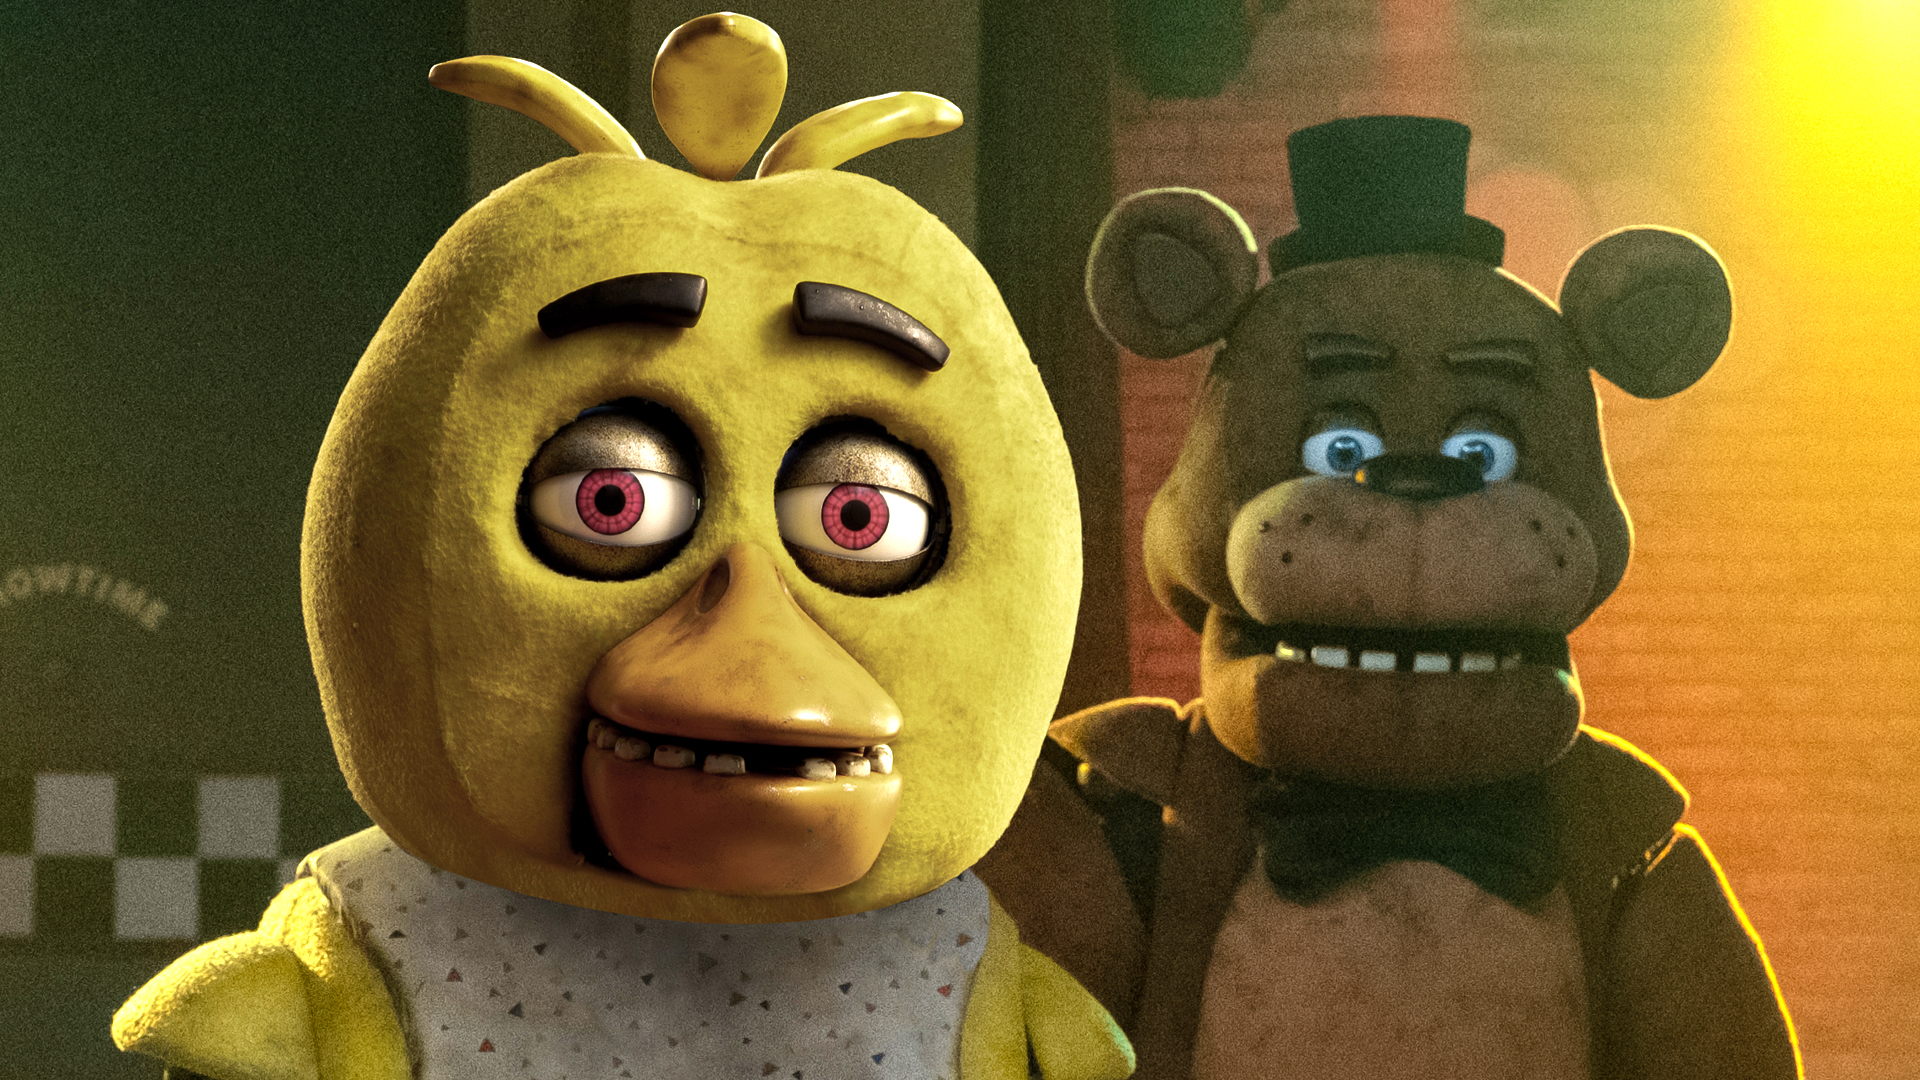 Five Nights At Freddy's Movie R-Rated Cut Rumor Debunked By Director